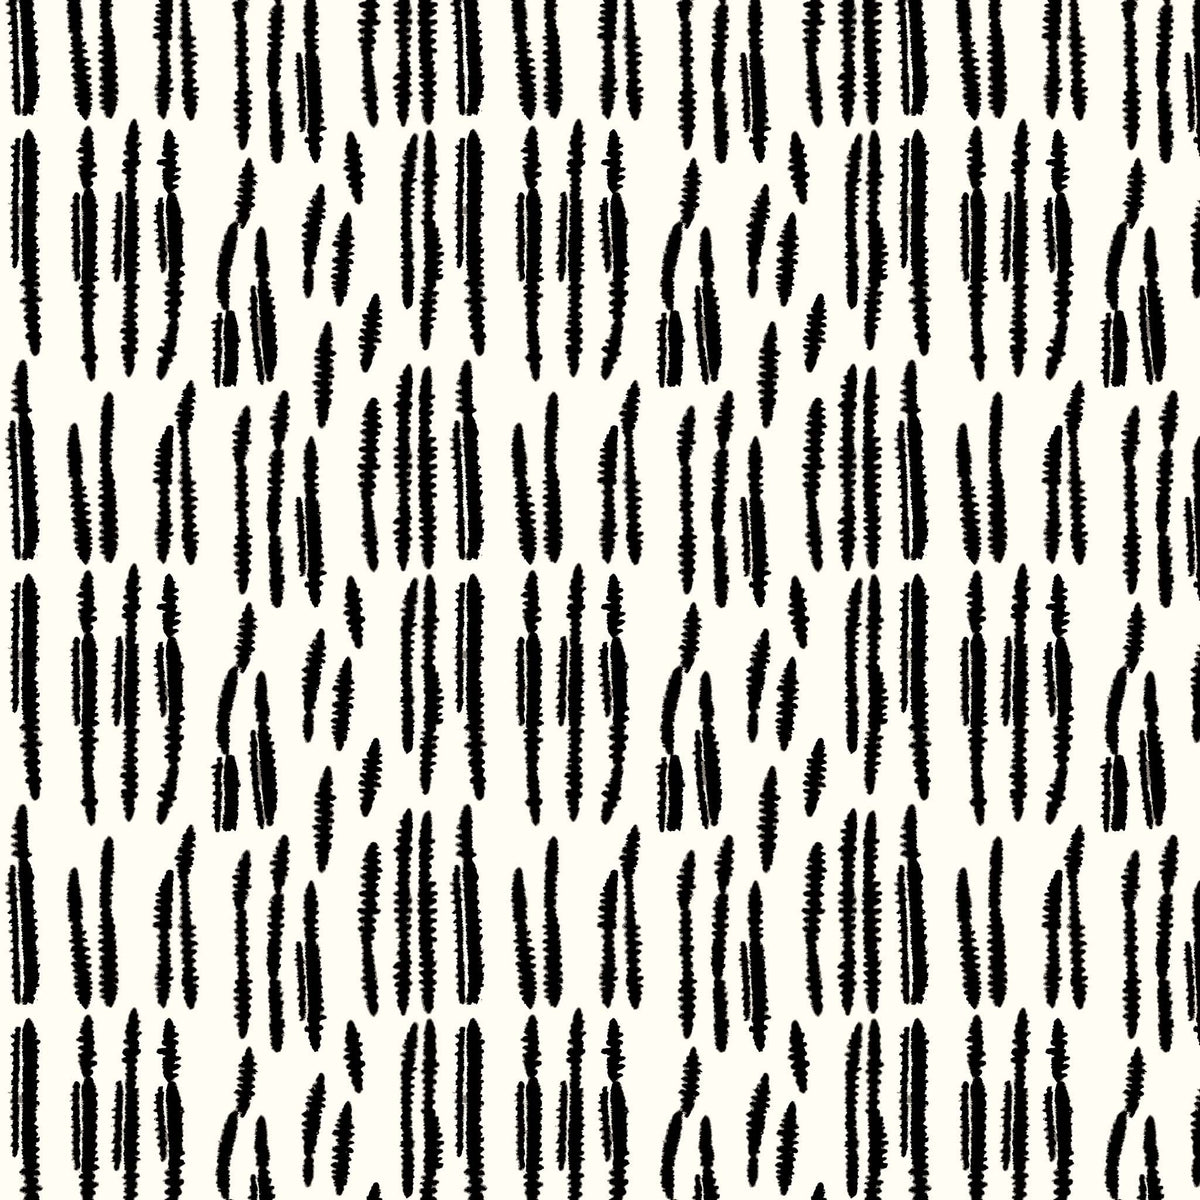 Basic Mudcloth Printed Fabric by the Yard | Fabric on Demand